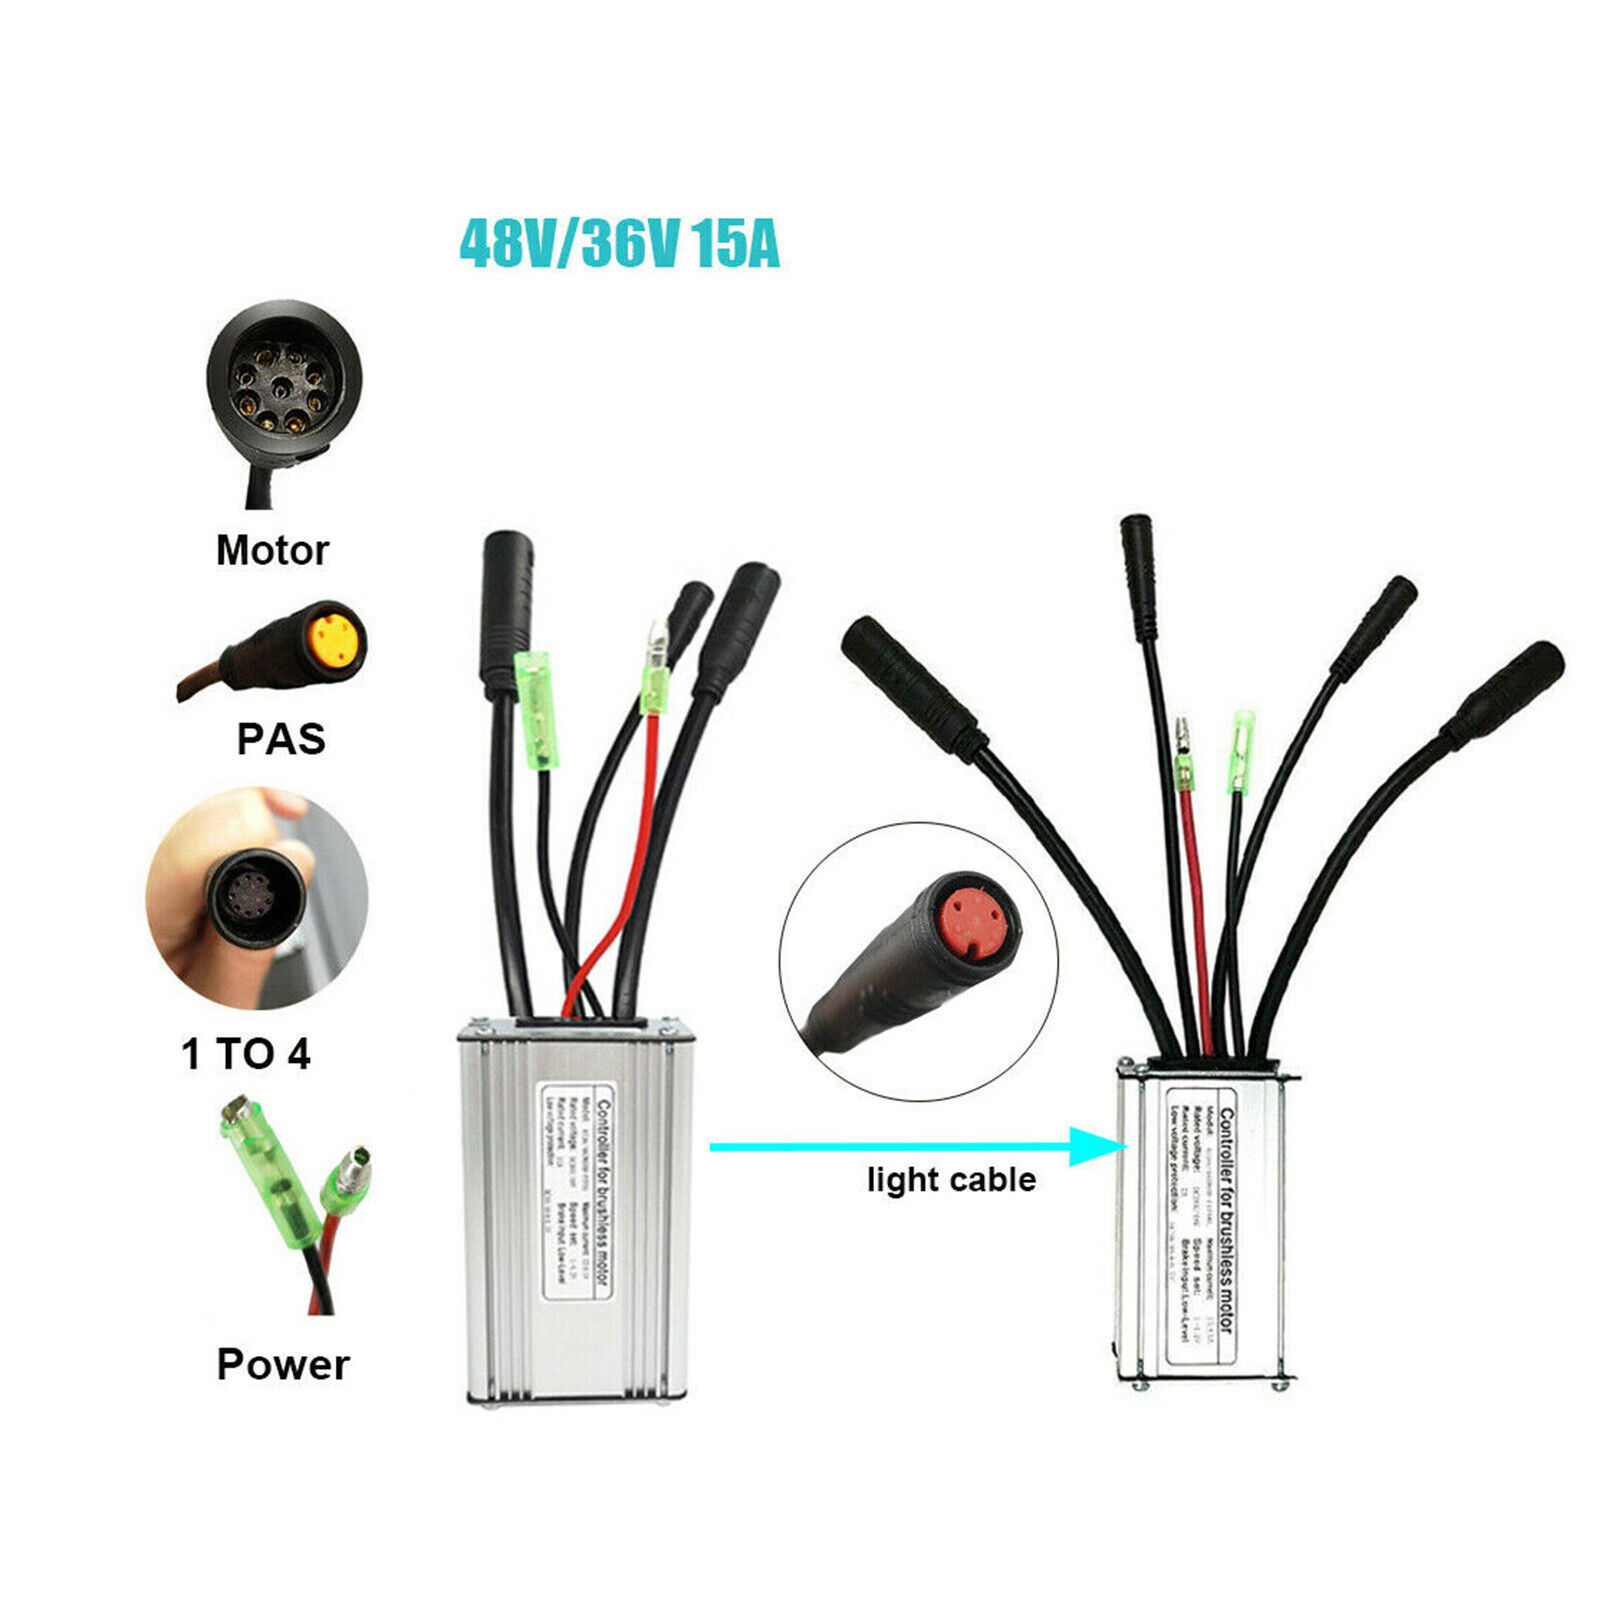 36 Direct store favorite 48V KT-15A Waterproof Plug 350W Brushless Controller 250W For